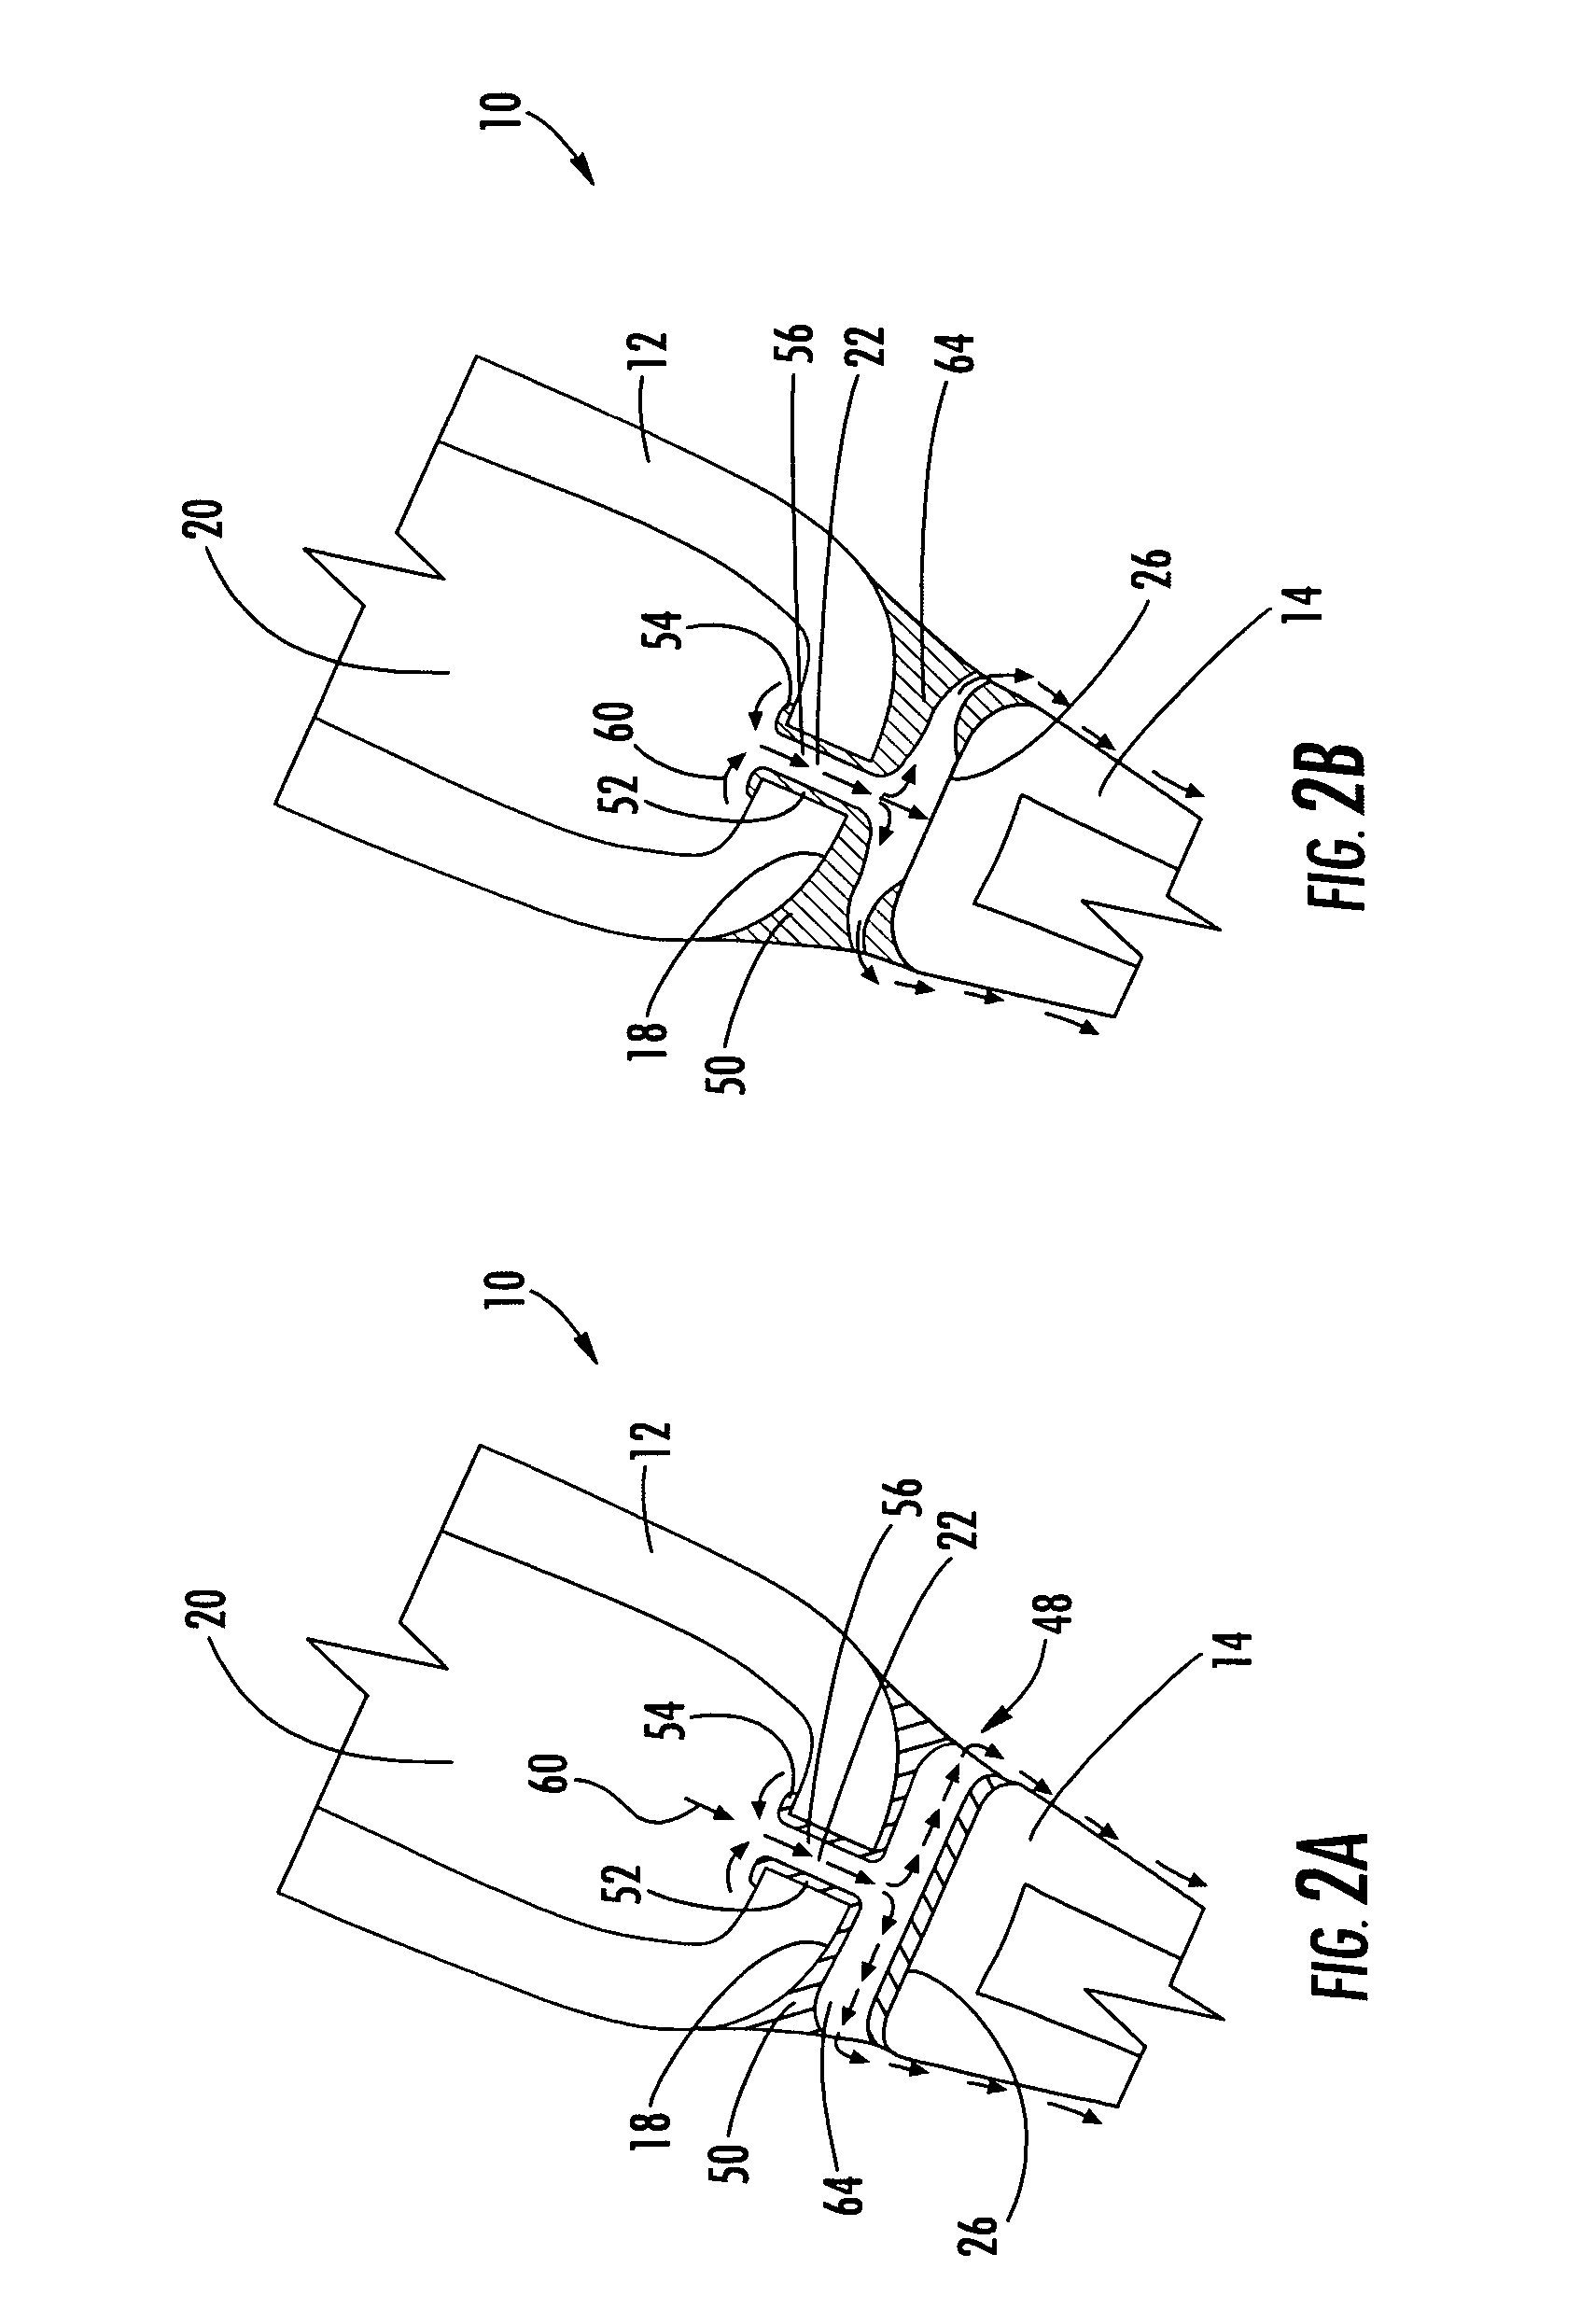 Vane assembly with metal trailing edge segment